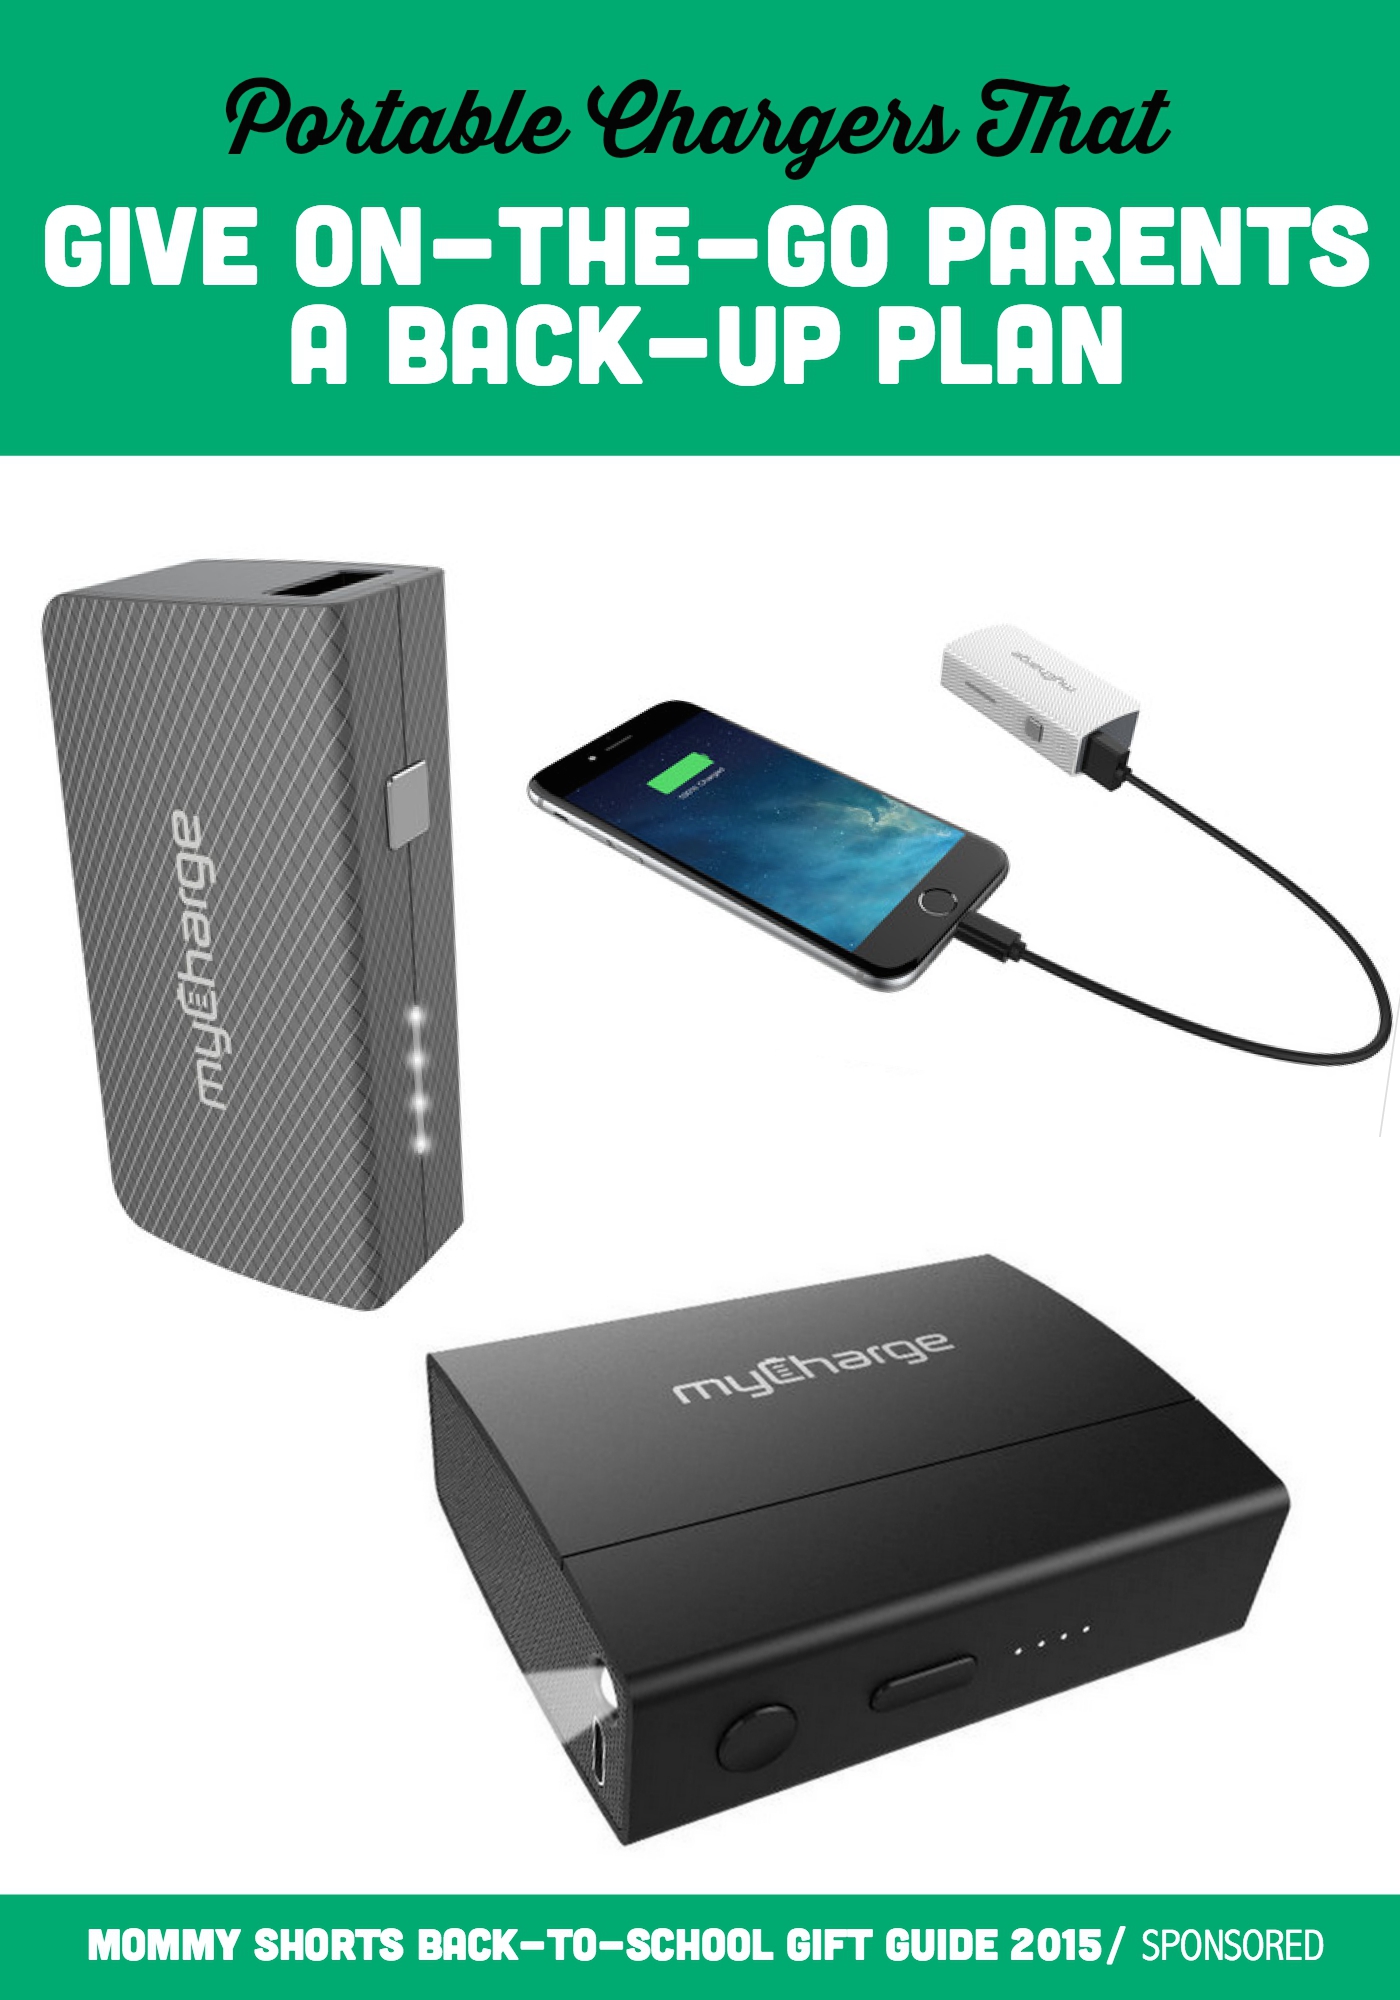 Portable Chargers That Give On-The-Go Parents a Back-Up Plan